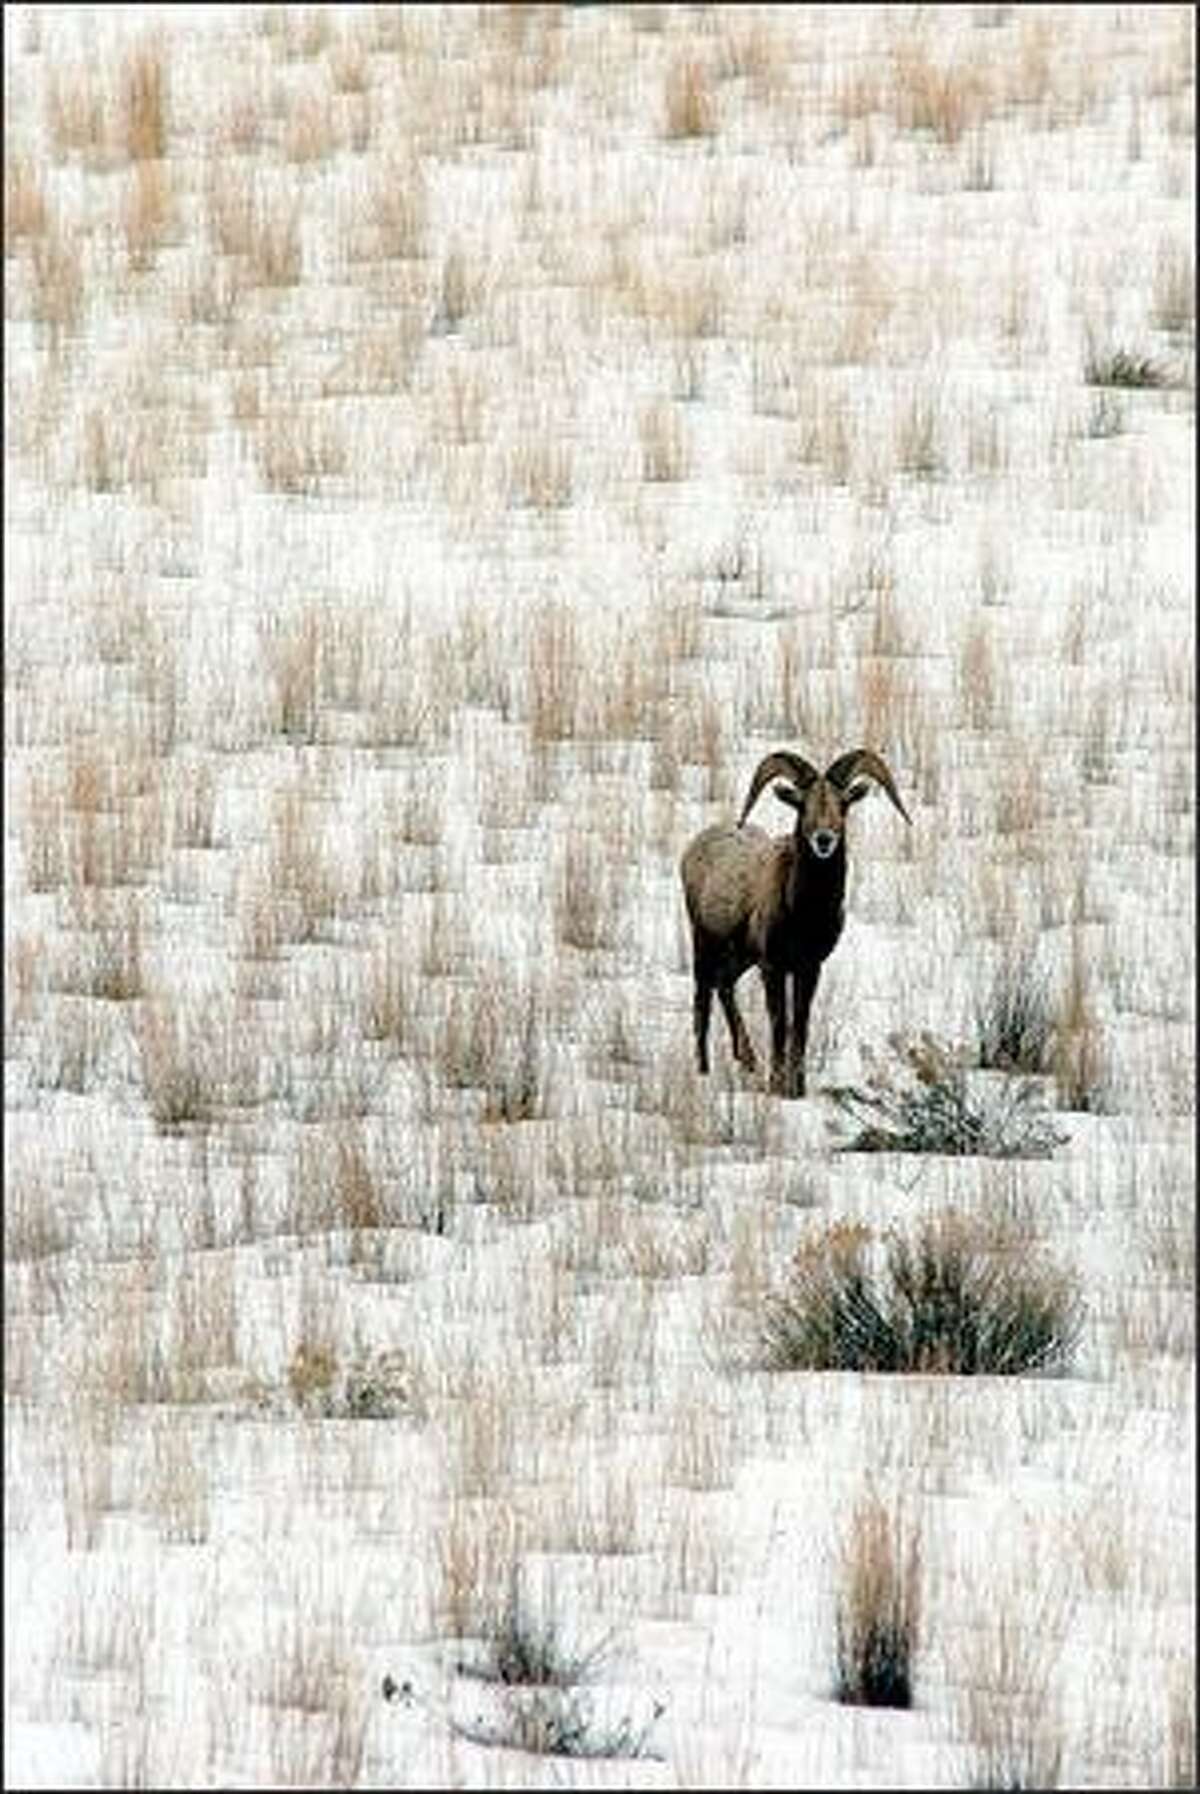 Bighorn sheep were reintroduced to the Yakima Valley in the 1960s. Made up of about 70 animals, the Tieton herd has its own winter feeding station near the elk feeding area.